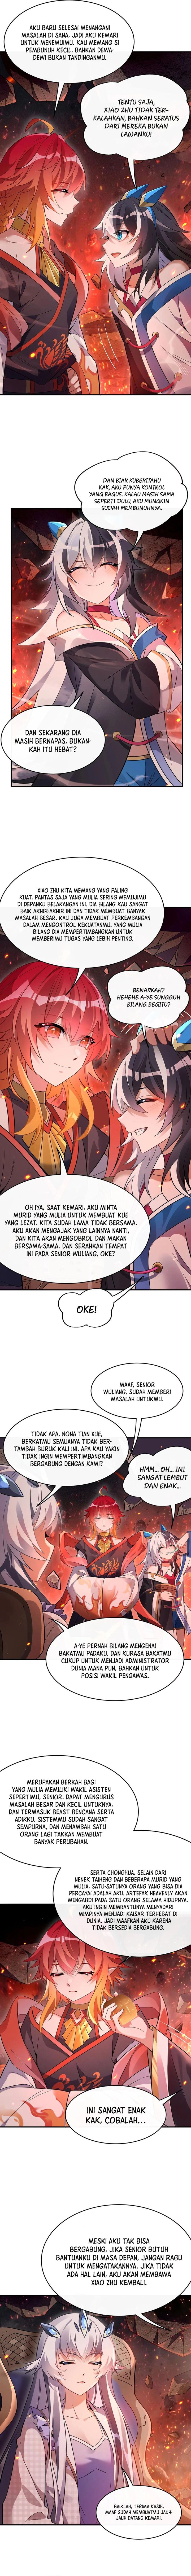 Dilarang COPAS - situs resmi www.mangacanblog.com - Komik my female apprentices are all big shots from the future 250 - chapter 250 251 Indonesia my female apprentices are all big shots from the future 250 - chapter 250 Terbaru 3|Baca Manga Komik Indonesia|Mangacan